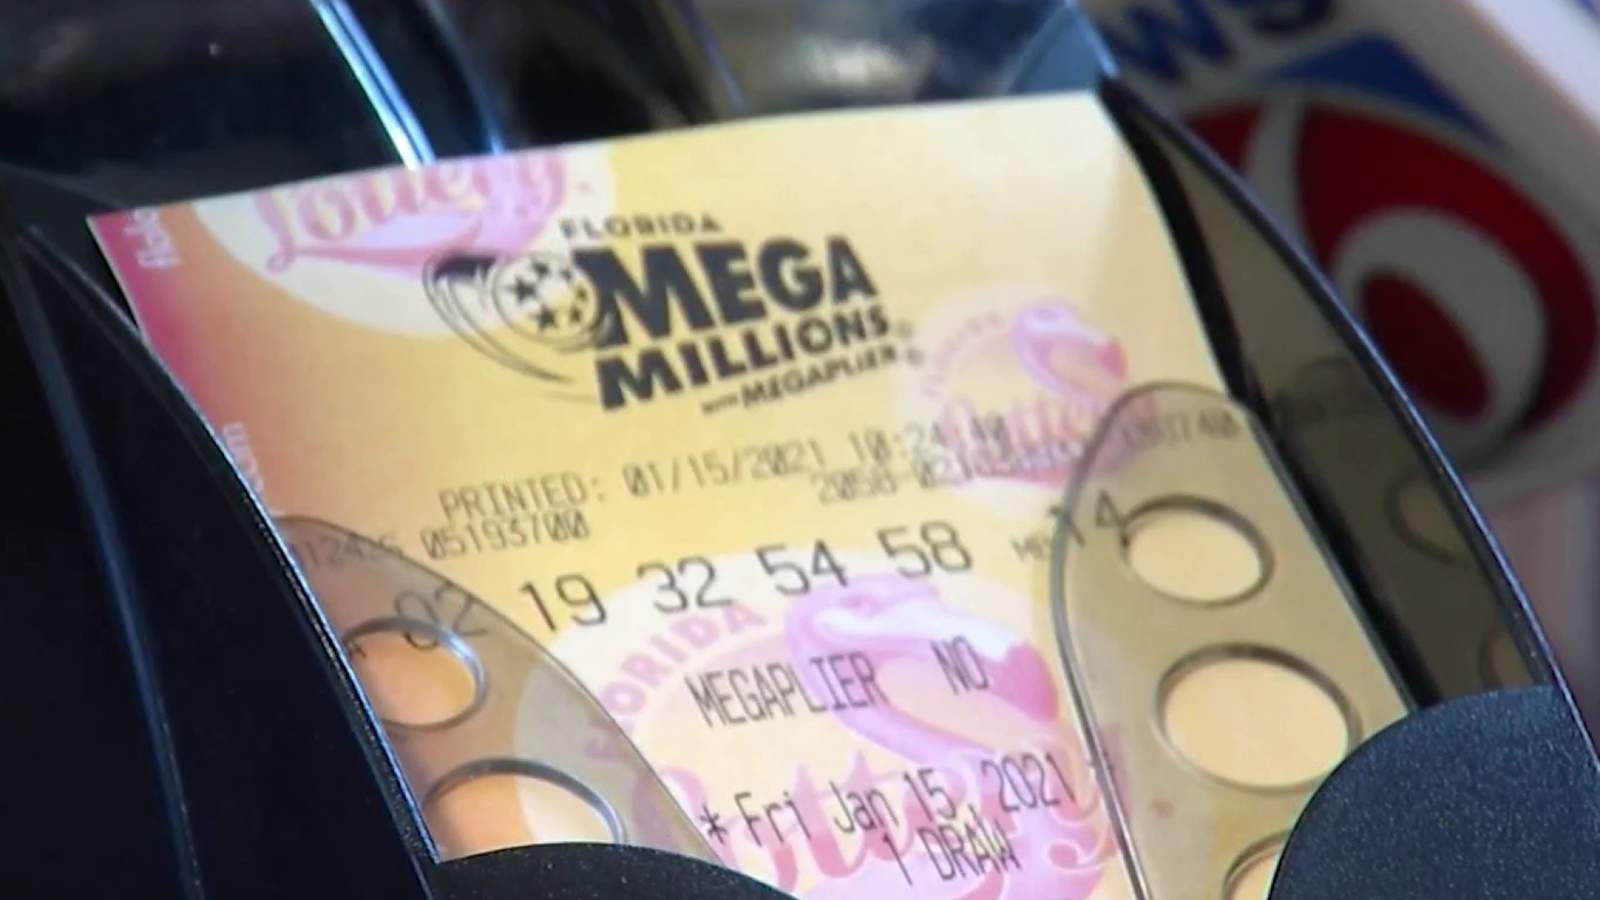 Next up: $730M Powerball prize after no Mega Millions winner